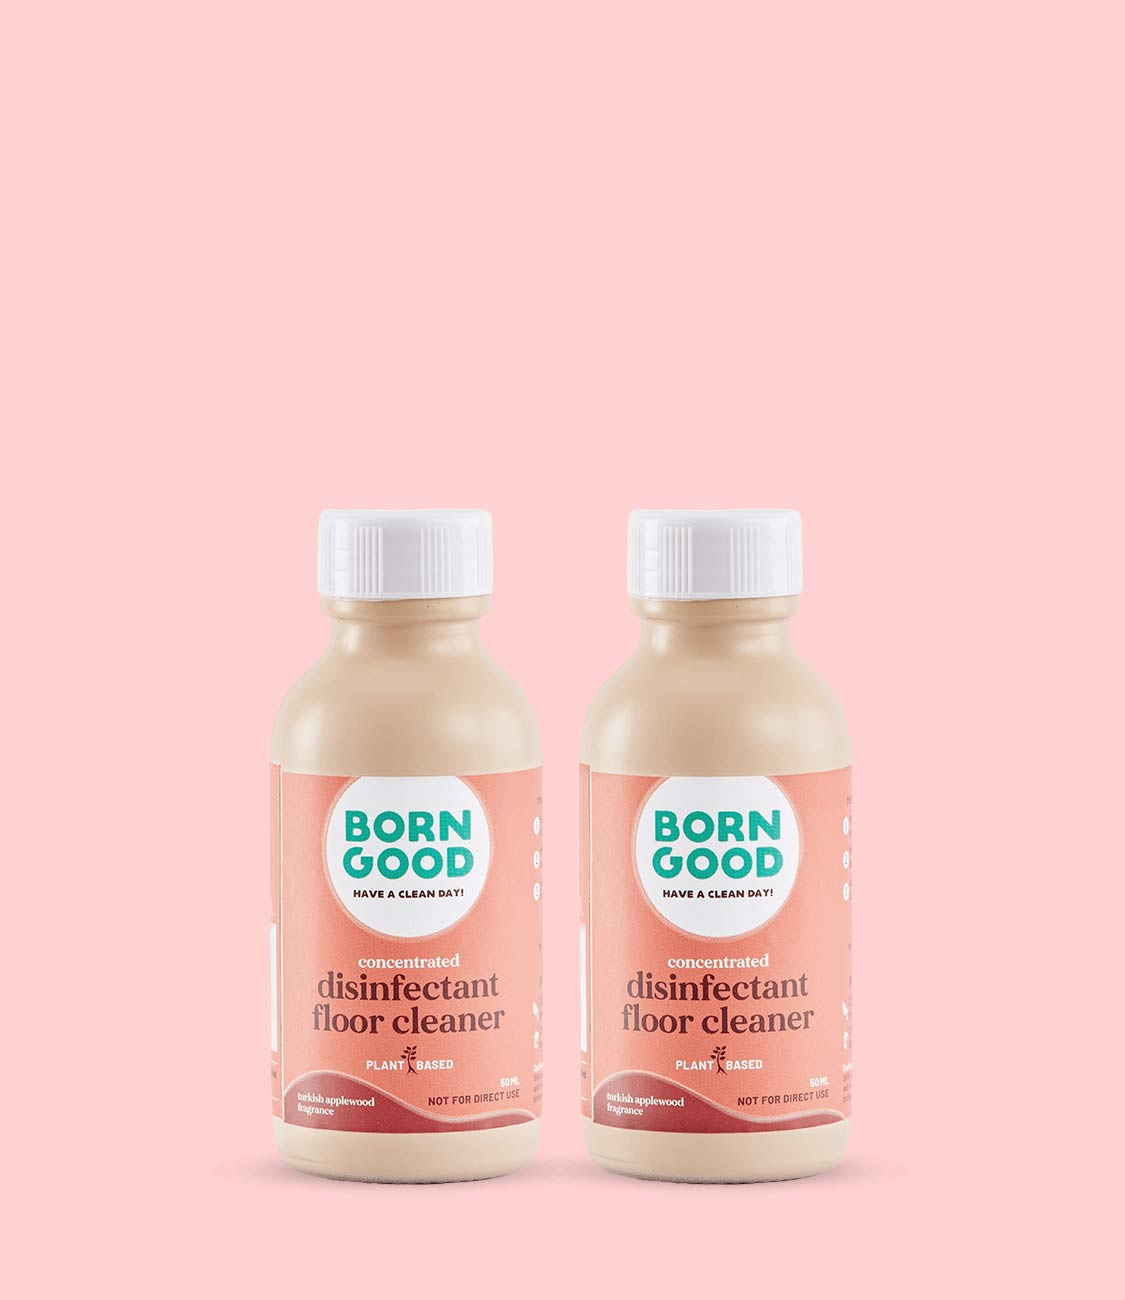 Born Good Plant-based Concentrated Floor Cleaner 50ml x 2 (Makes 1 L)